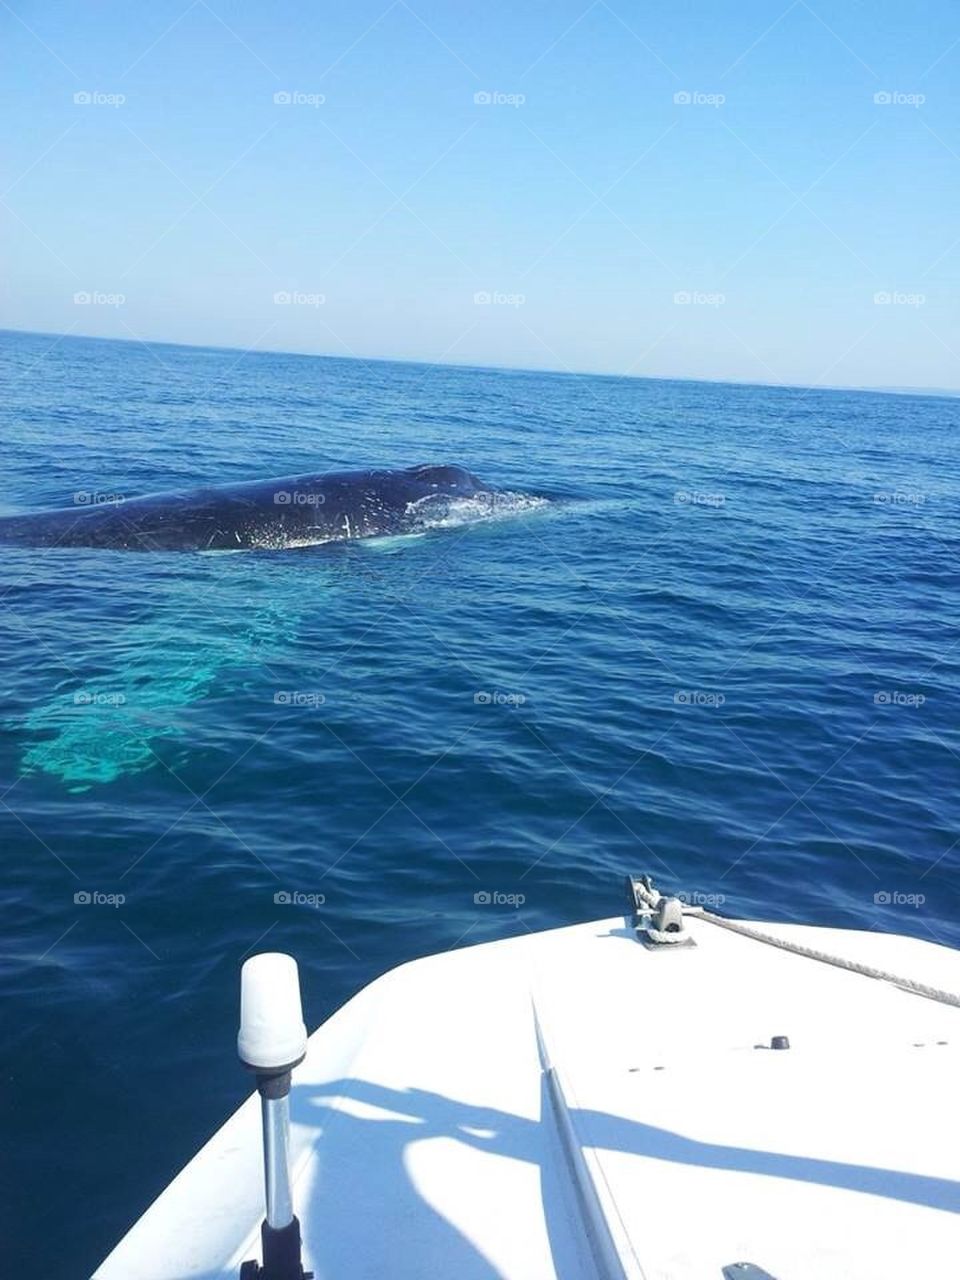 Whale close to boat